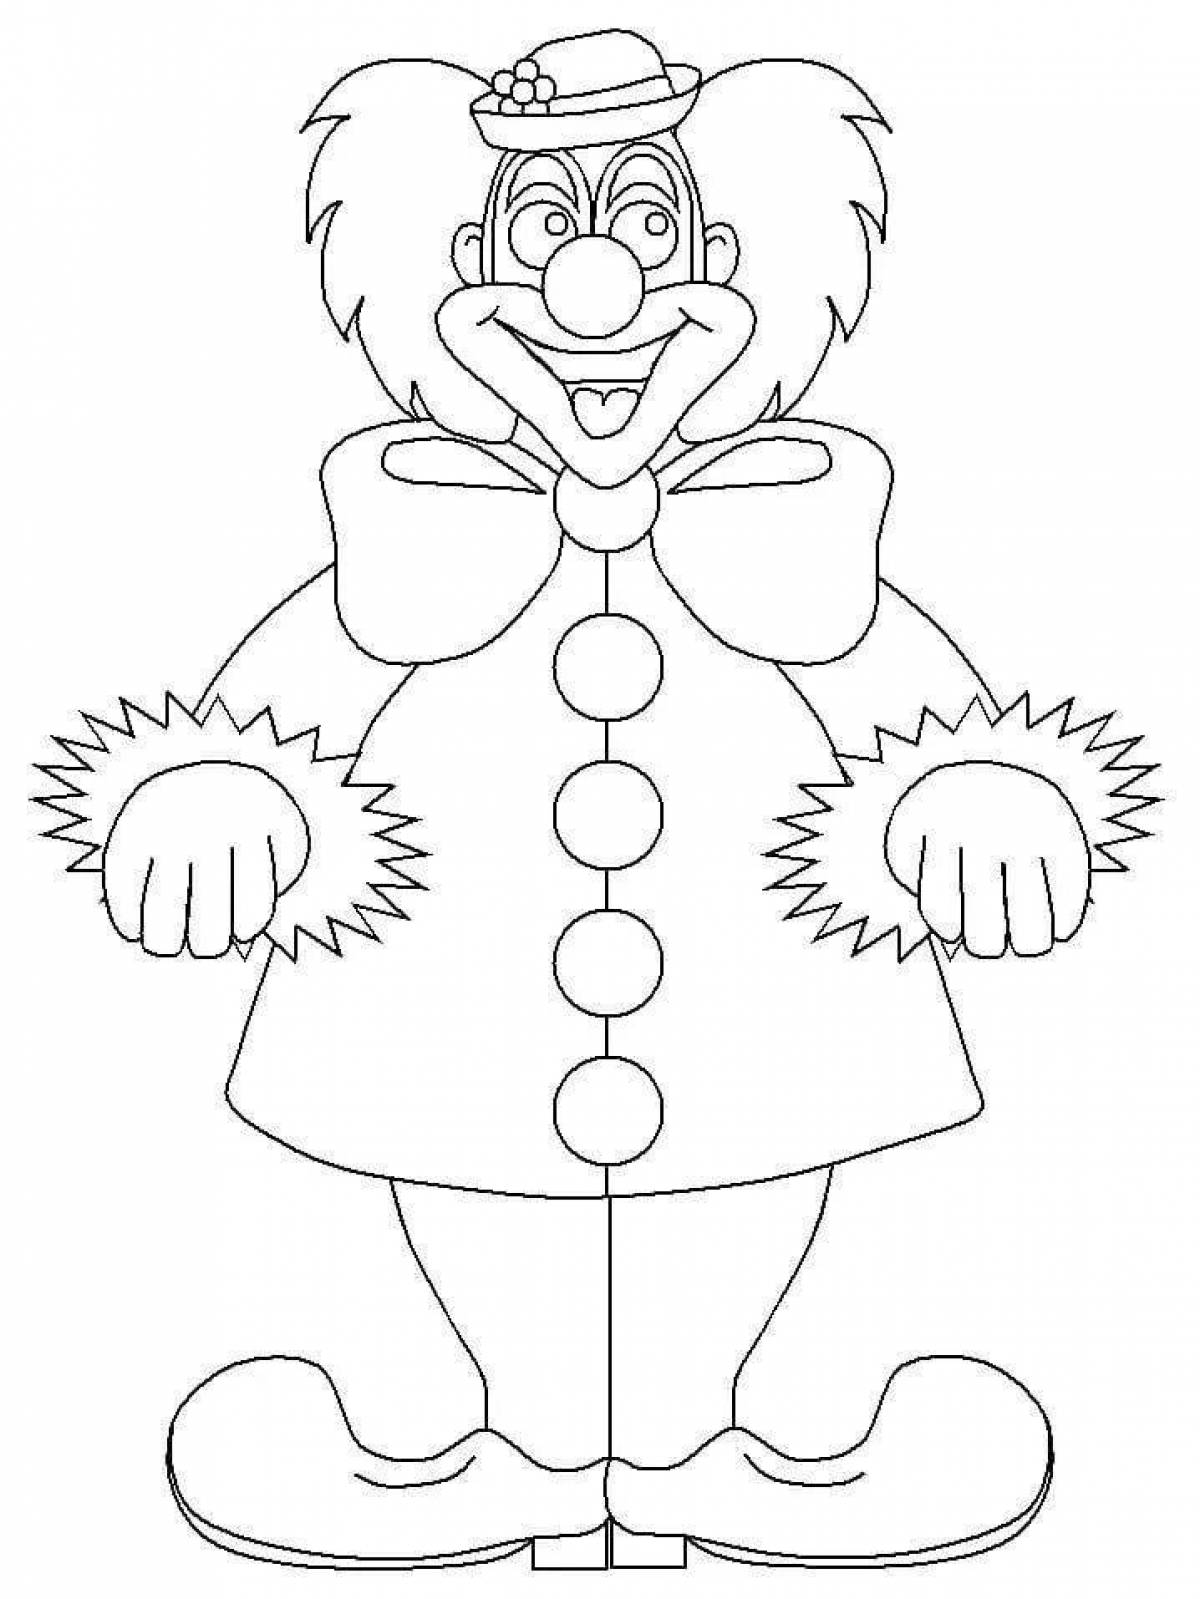 Cute clown coloring pages for kids